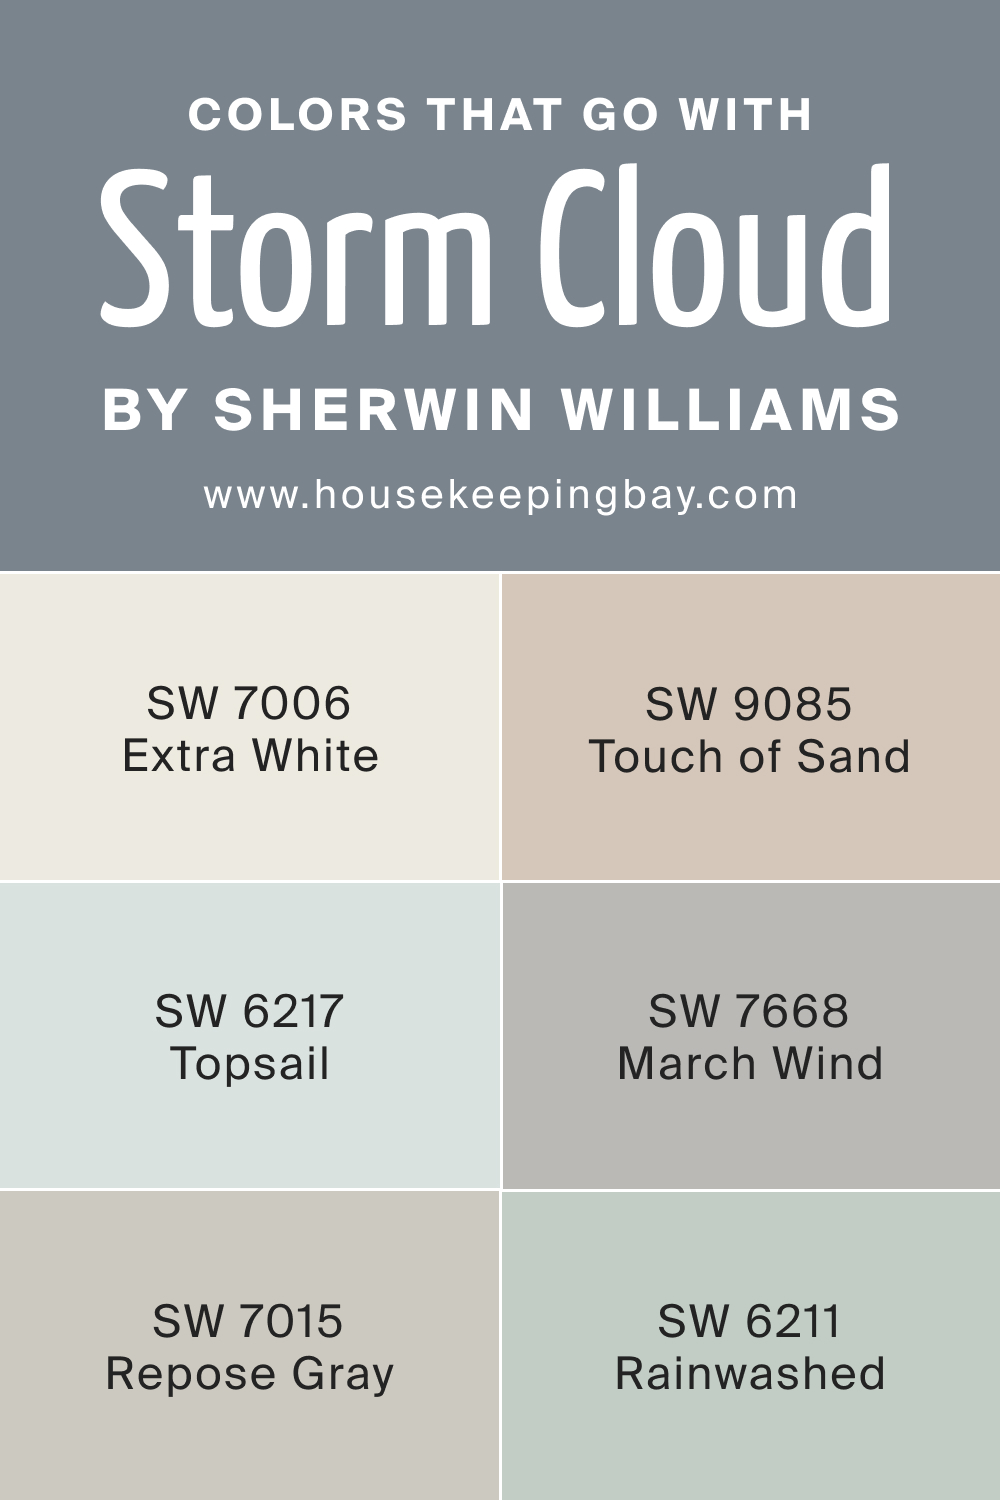 Colors that goes with SW 6249 Storm Cloud by Sherwin Williams